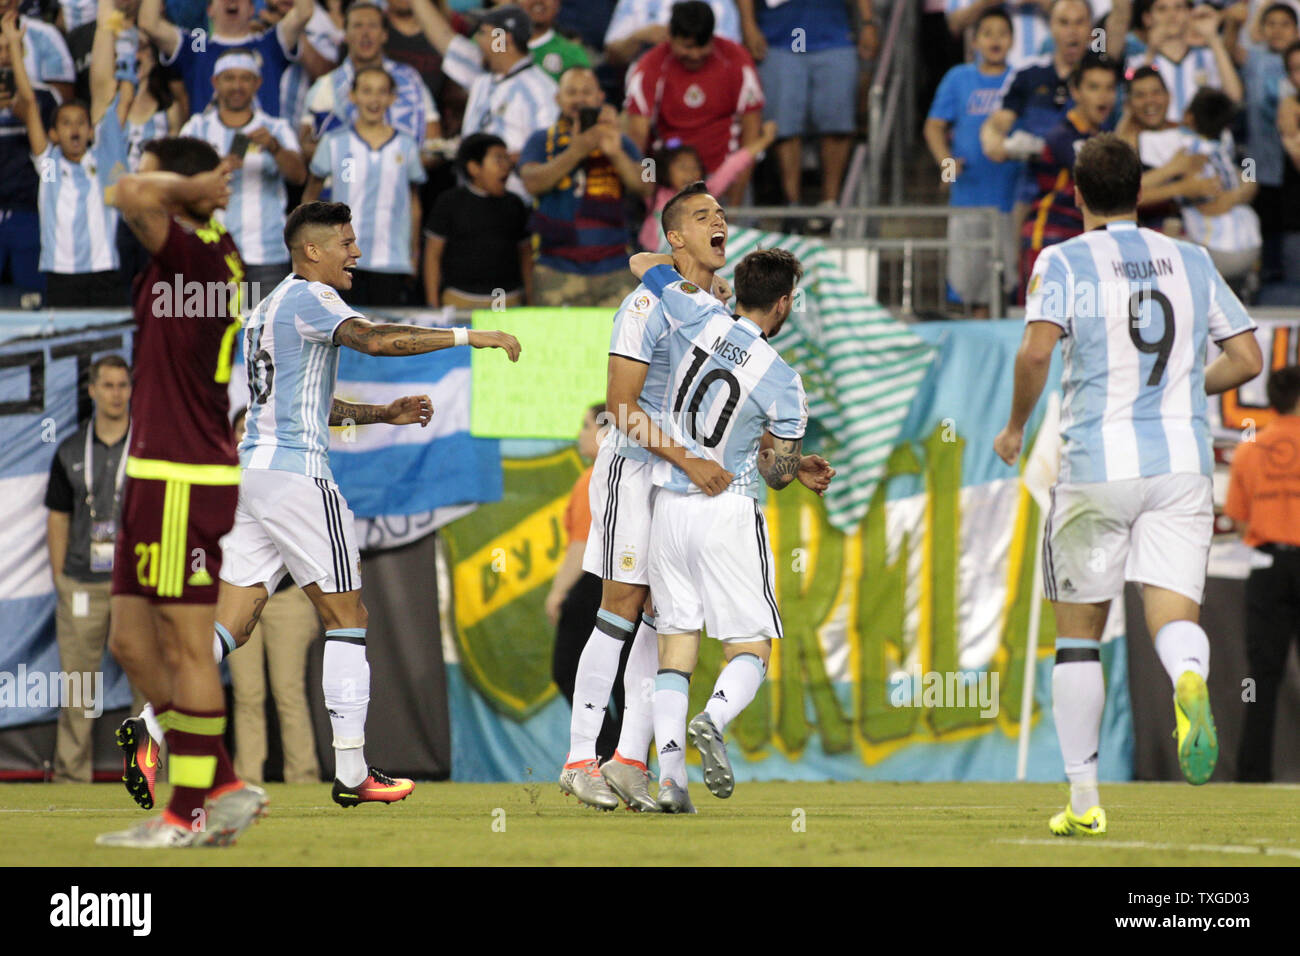 Argentina midfielder Lionel Messi (10) gives a hug to forward Eric Lamela (18) as defender Marcos Rojo (16) and forward Gonzalo Higuain (9) join the celebration after Lamela scored against Venezuela in the second half of the 2016 Copa America Centenario quarterfinal match at Gillette Stadium in Foxborough, Massachusetts on June 18, 2016. Argentina defeated Venezuela 4-1. Photo by Matthew Healey/UPI Stock Photo